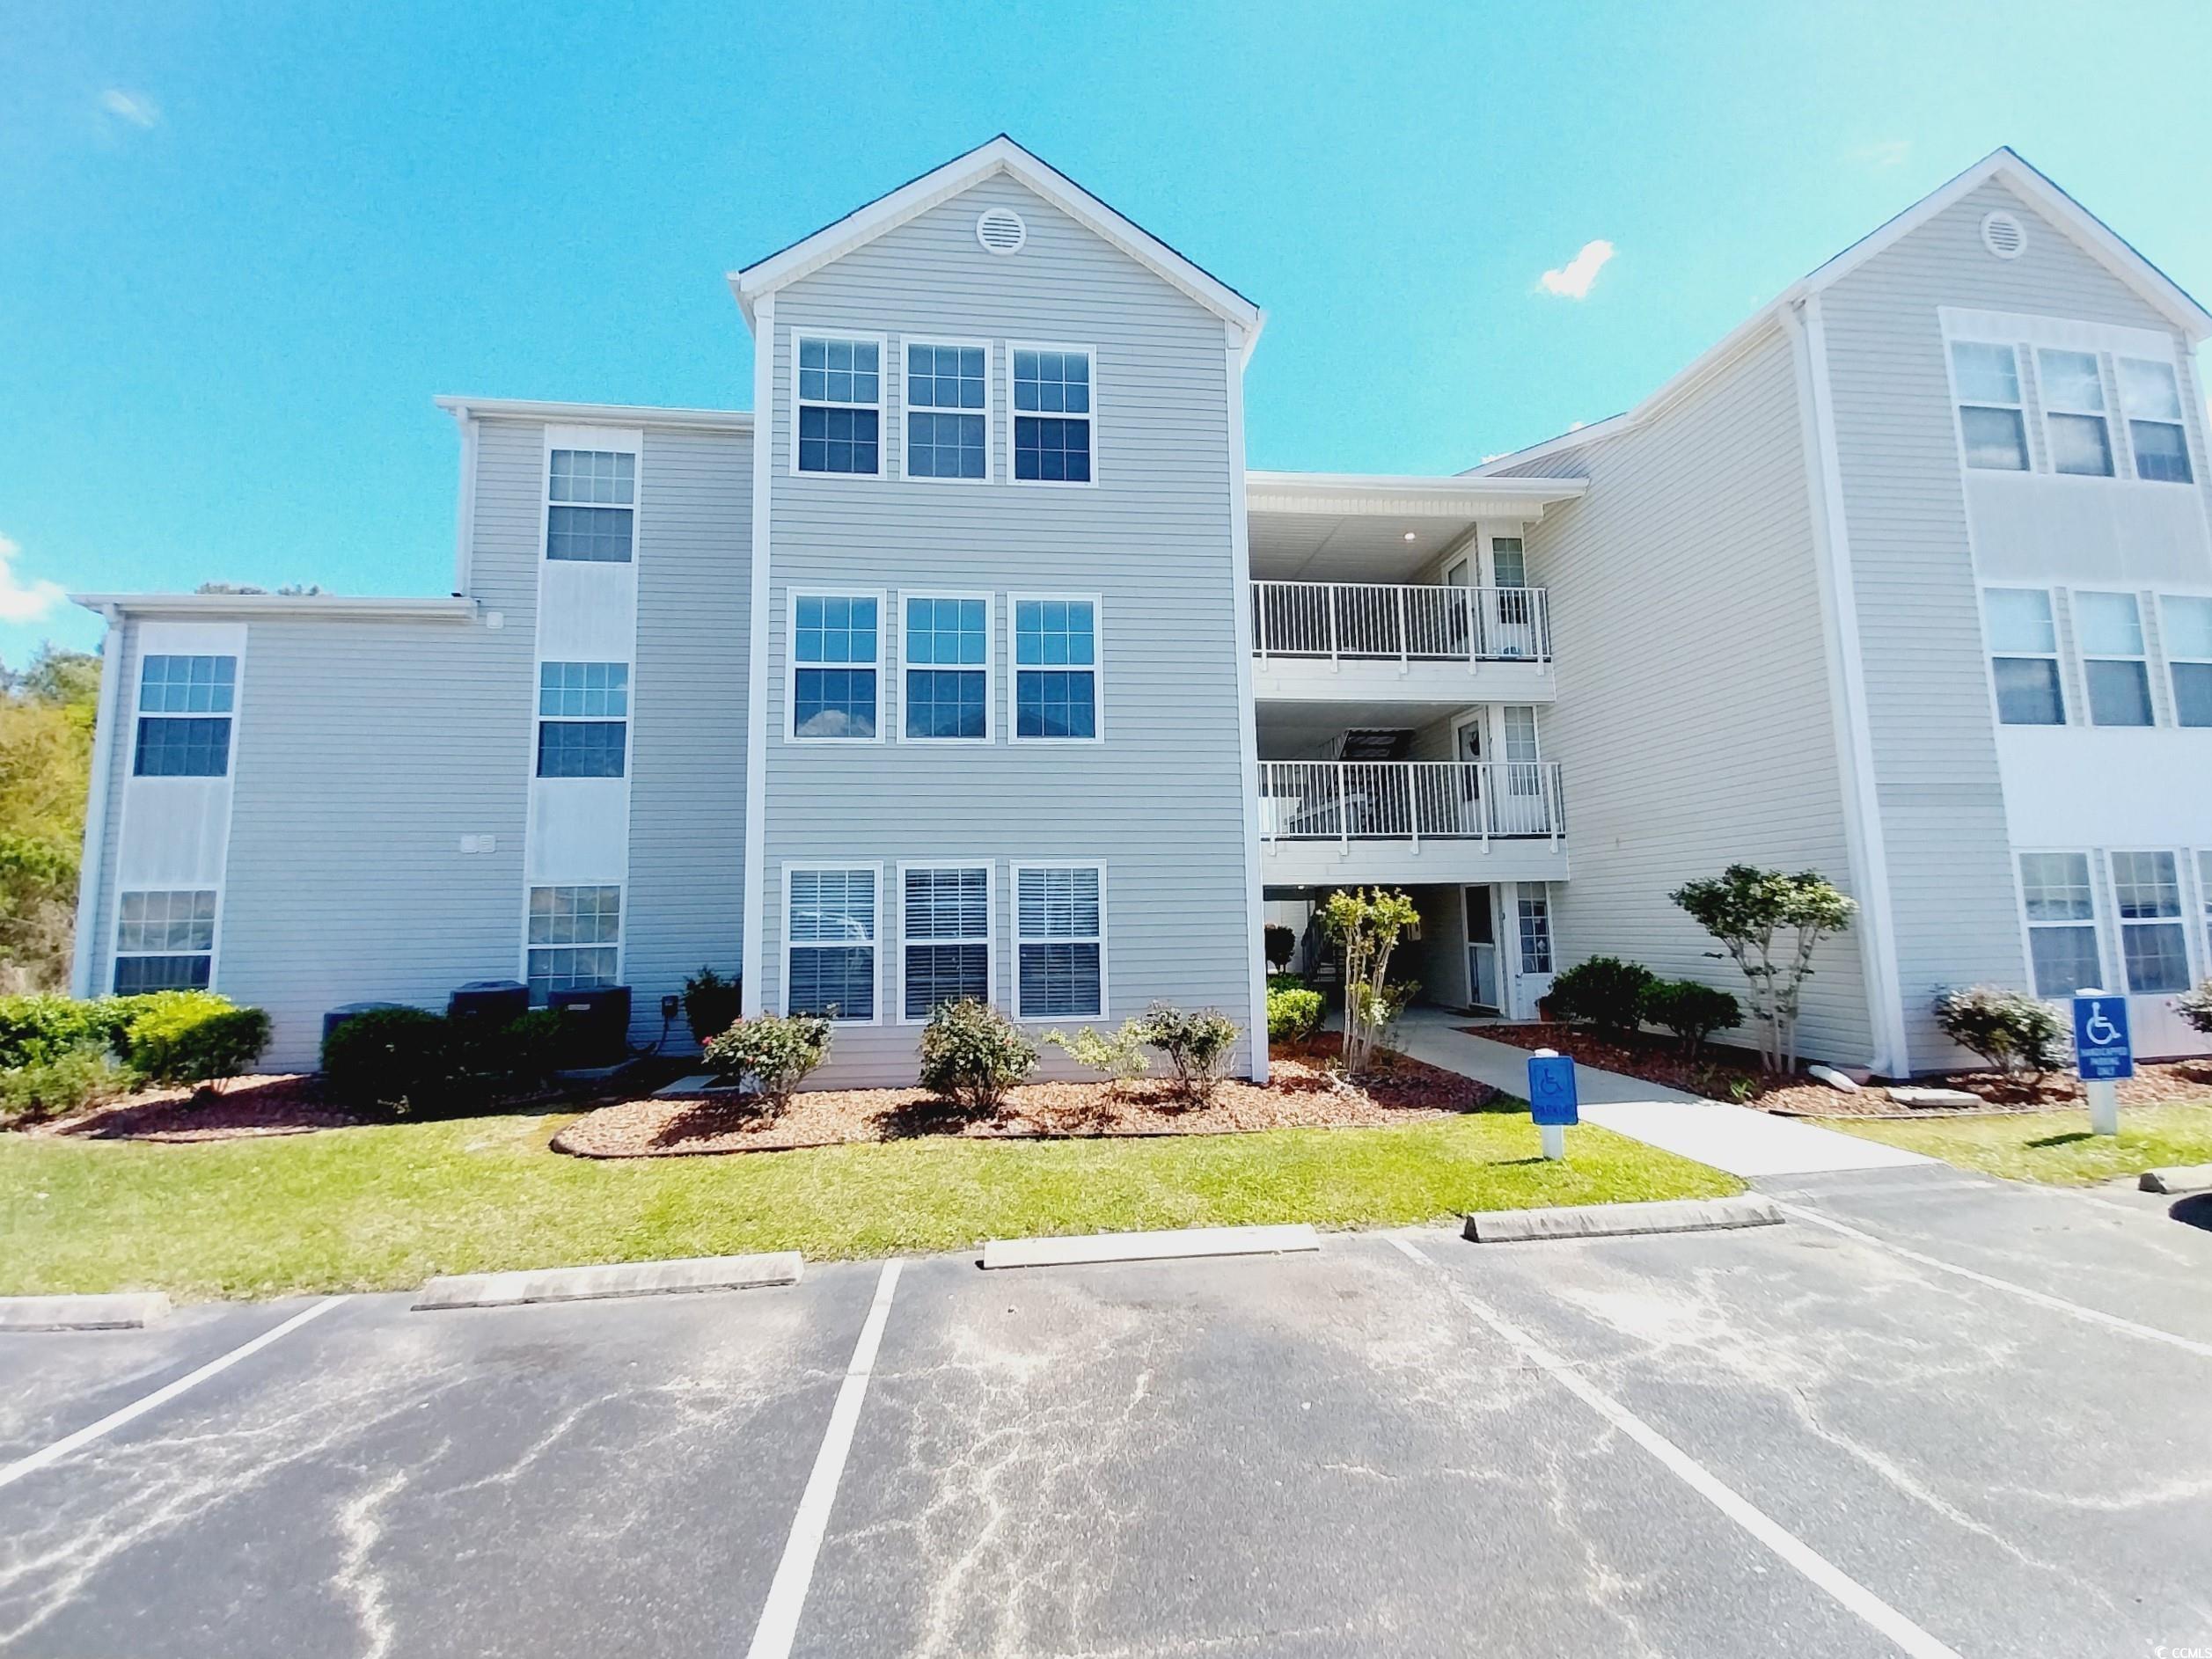 here is a great opportunity to own a 1st floor condo that is barely a 10 minute drive to the beautiful beach in surfside!  this 2 bedroom, 2 bath unit is in the desirable southbidge community and close to all the wonderful dining, shopping and recreation activities that myrtle beach and the grand strand offer.  plenty of natural light will be enjoyed, and the carolina room is a great place to relax and enjoy the beautiful weather that we experience throughout the year.  the hoa fee covers many amenities to make this home even more affordable; which includes the exterior insurance, water and sewer, trash, cable and internet, the nice pool to enjoy that is only steps away and more.  the building is next to a large pond, which offers another setting to relax and enjoy during your days. call today to schedule your showing for this condo, you'll soon be living 10 minutes from the beach!!